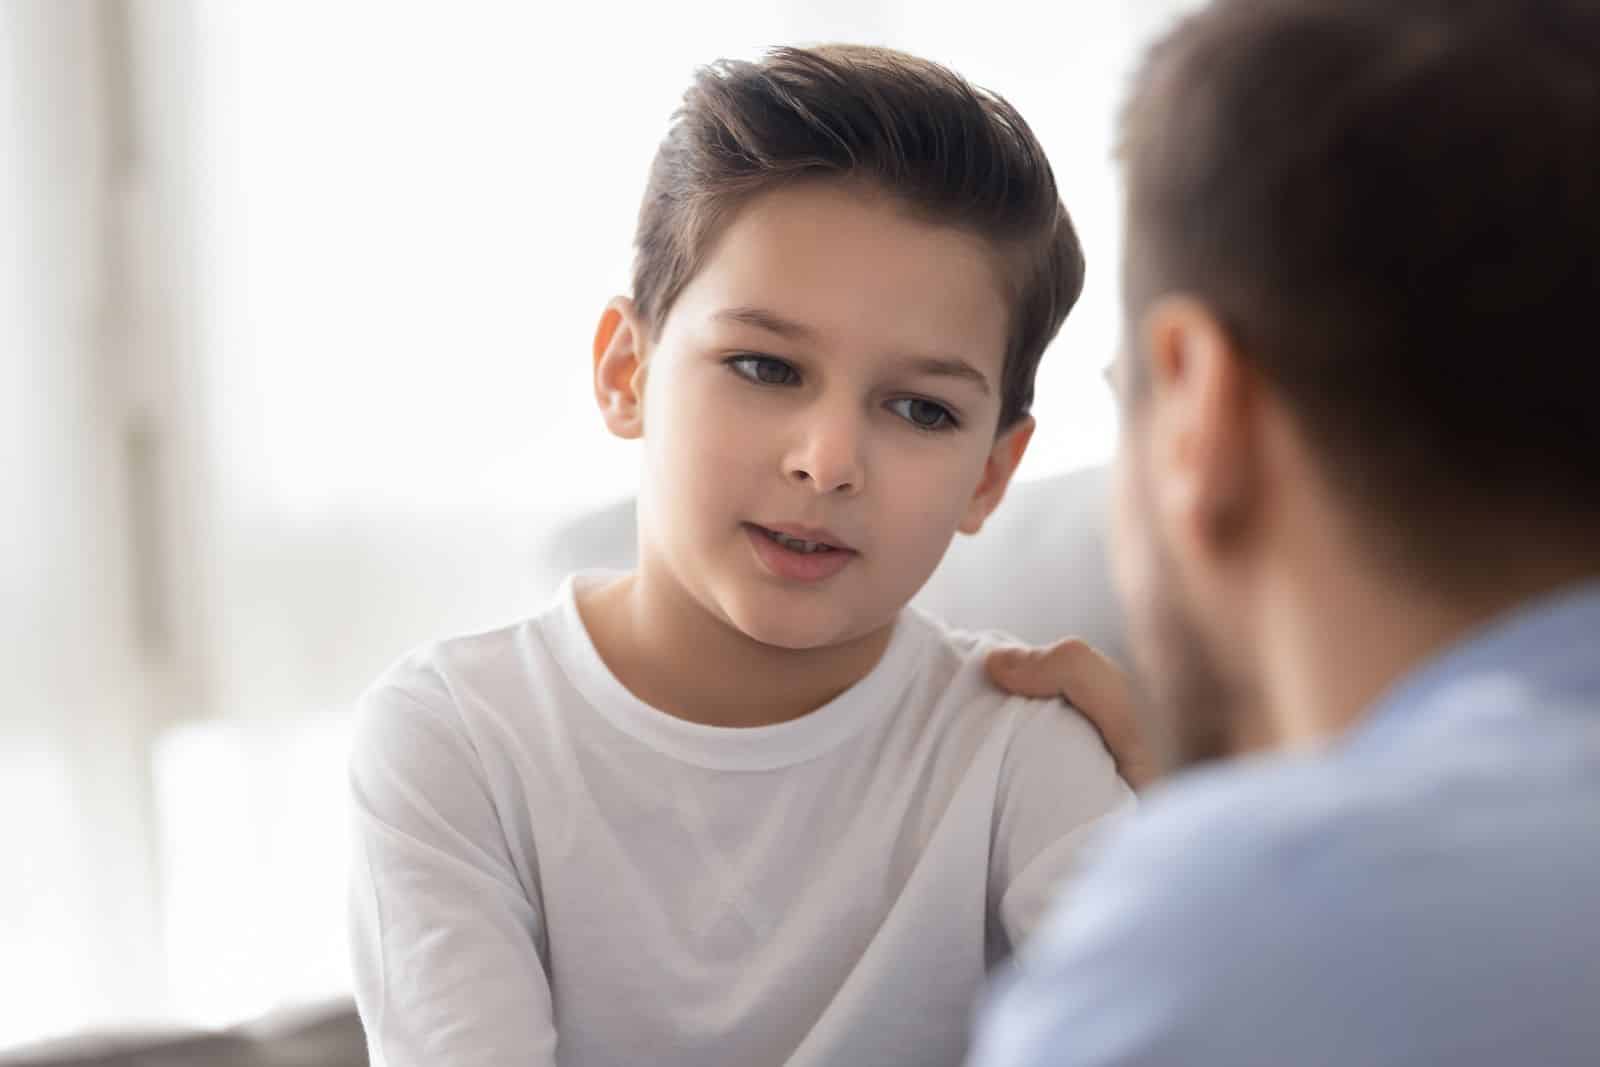 Image Credit: Shutterstock / fizkes <p>Name a guardian for your minor children in your will. This is crucial to ensure they’re cared for by someone you trust if the worst happens.</p>